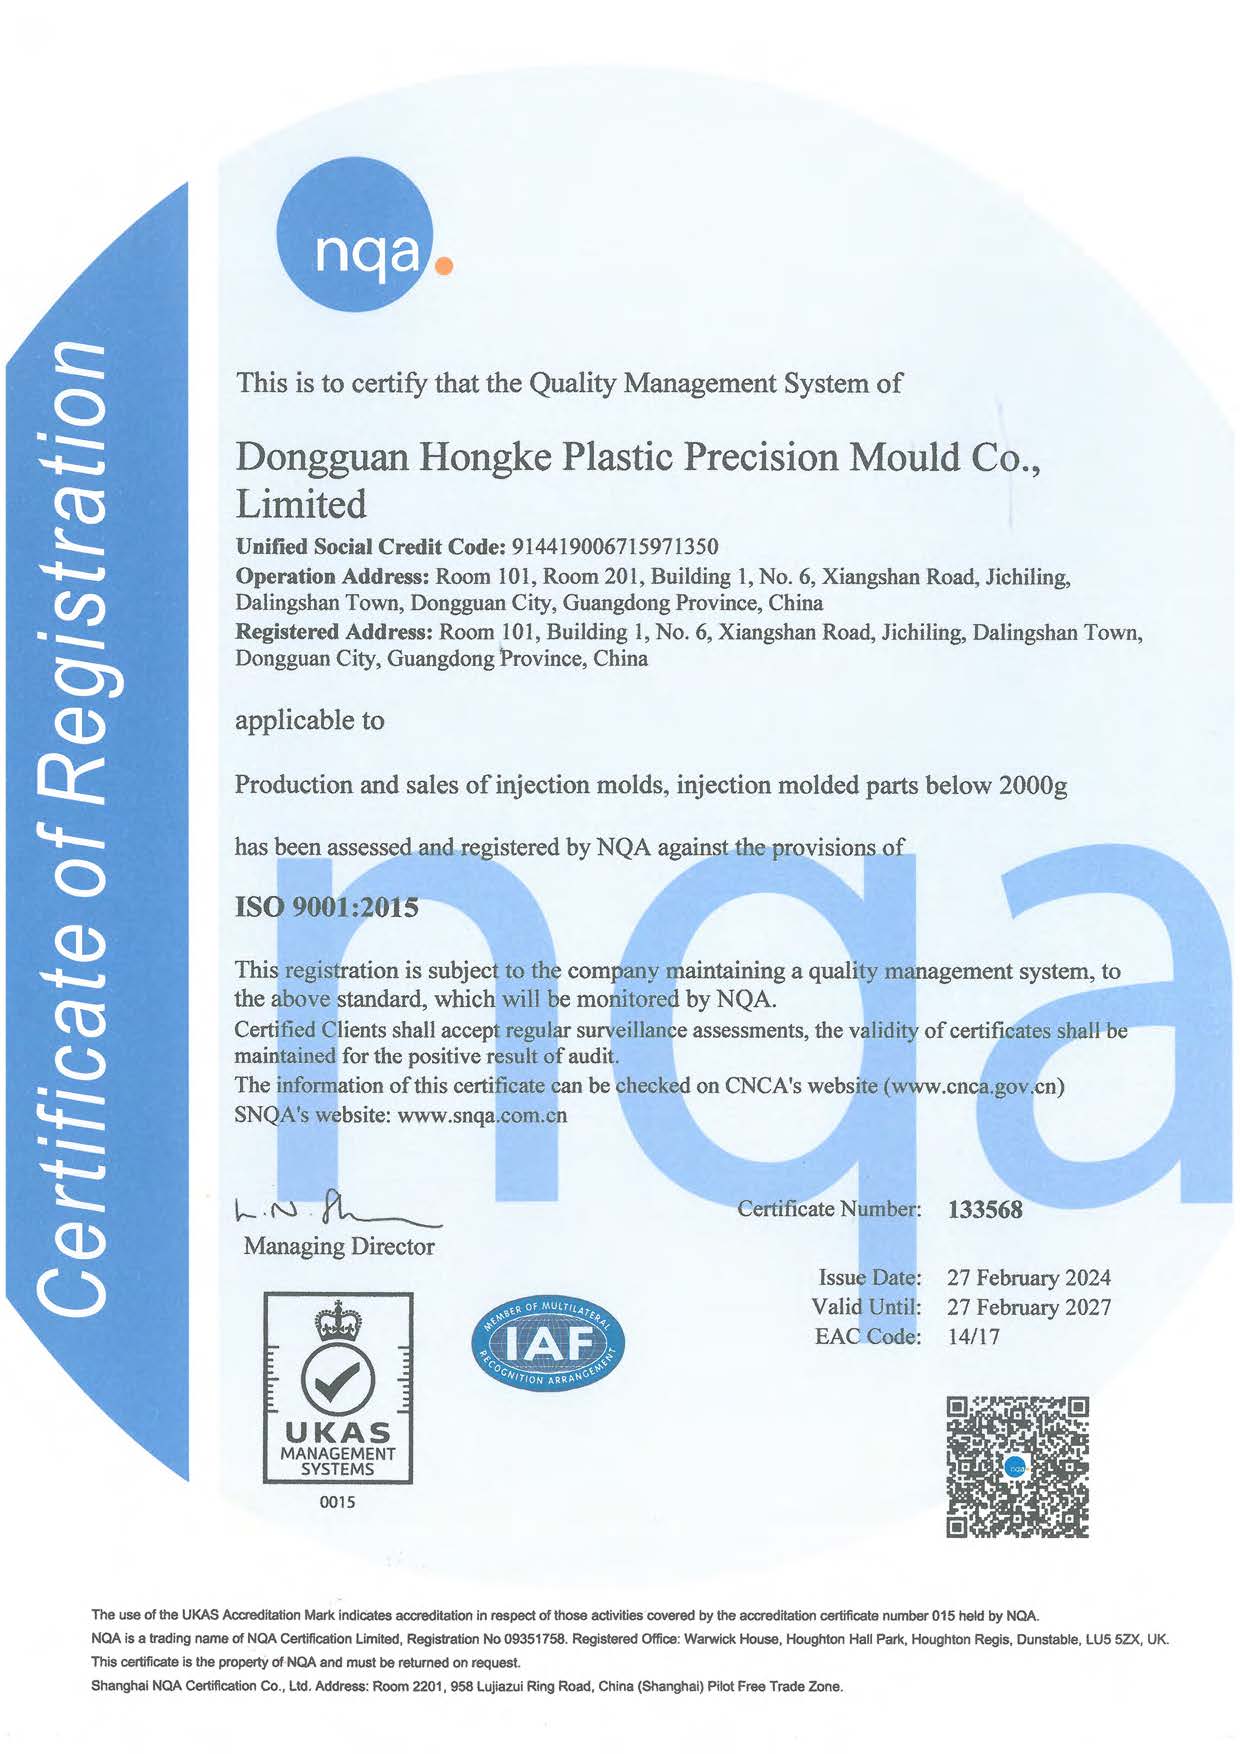  Hongke Mold Obtained ISO9001 Quality Management System Certification